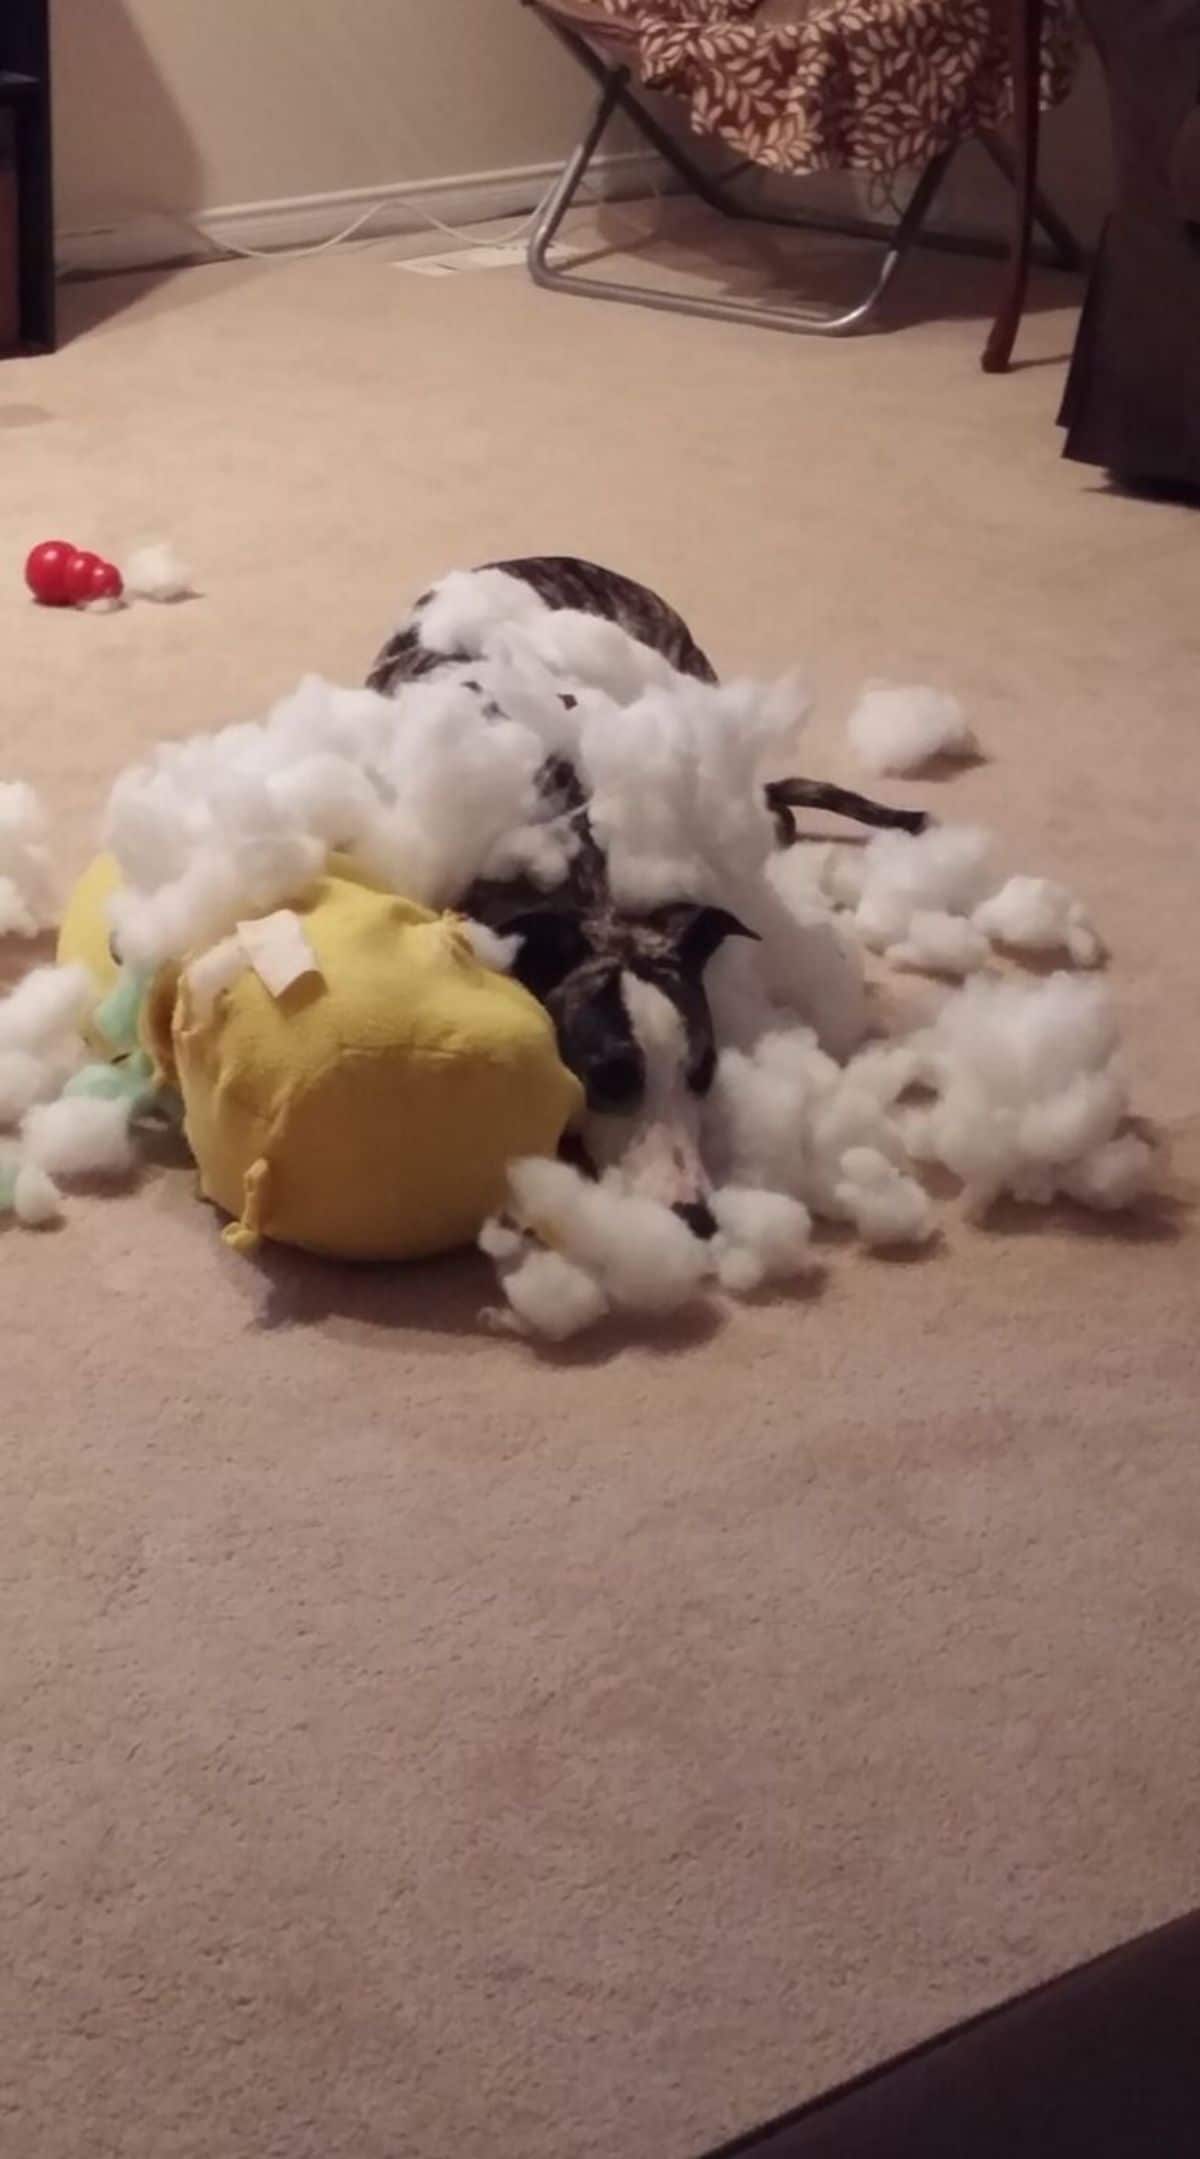 black dog tearing up a yellow stuffed toy with the white stuffing coming out